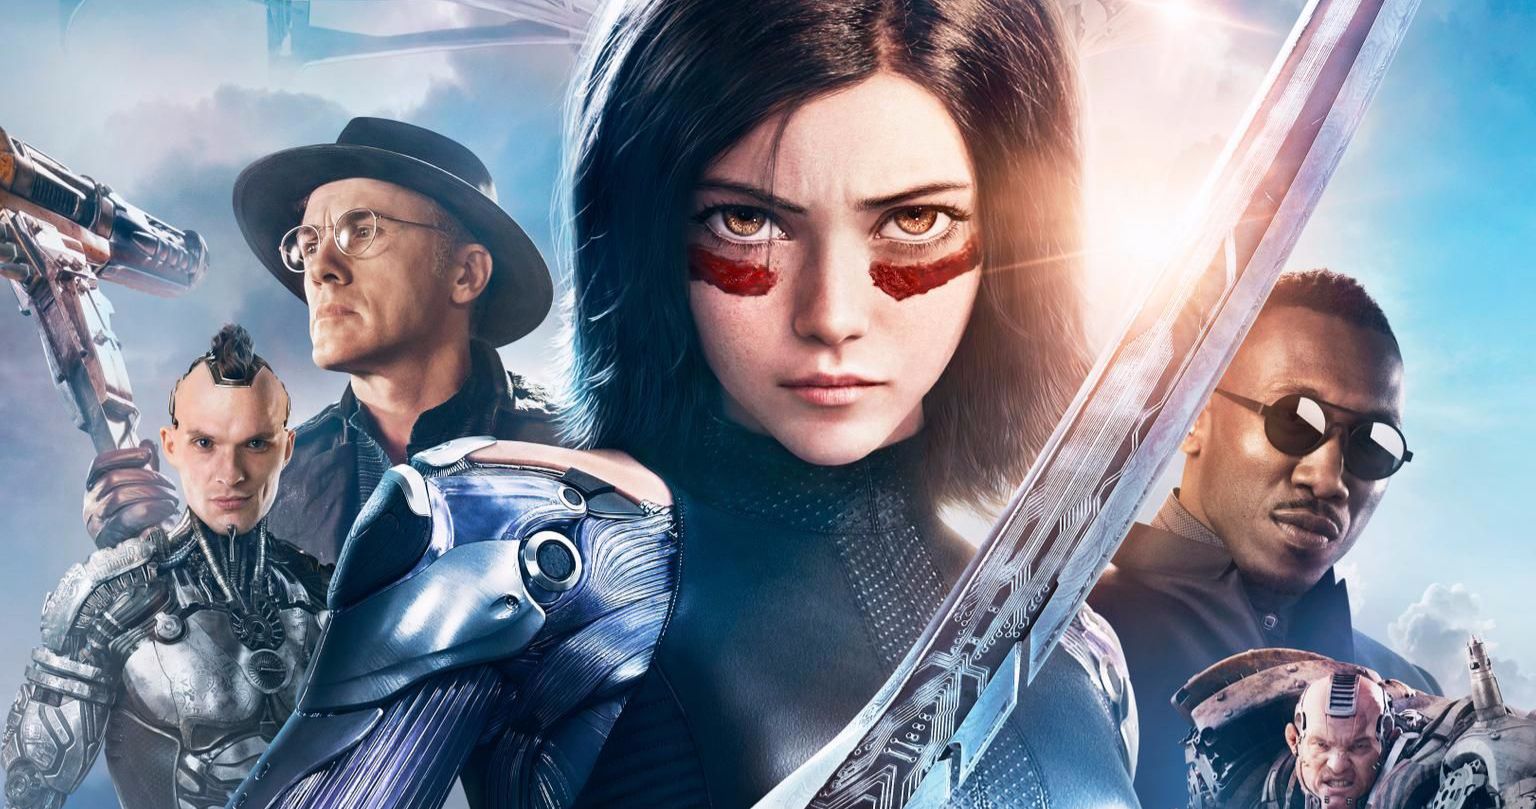 Alita Army Continues Battling for Battle Angel 2 with Digital Billboard for Charity